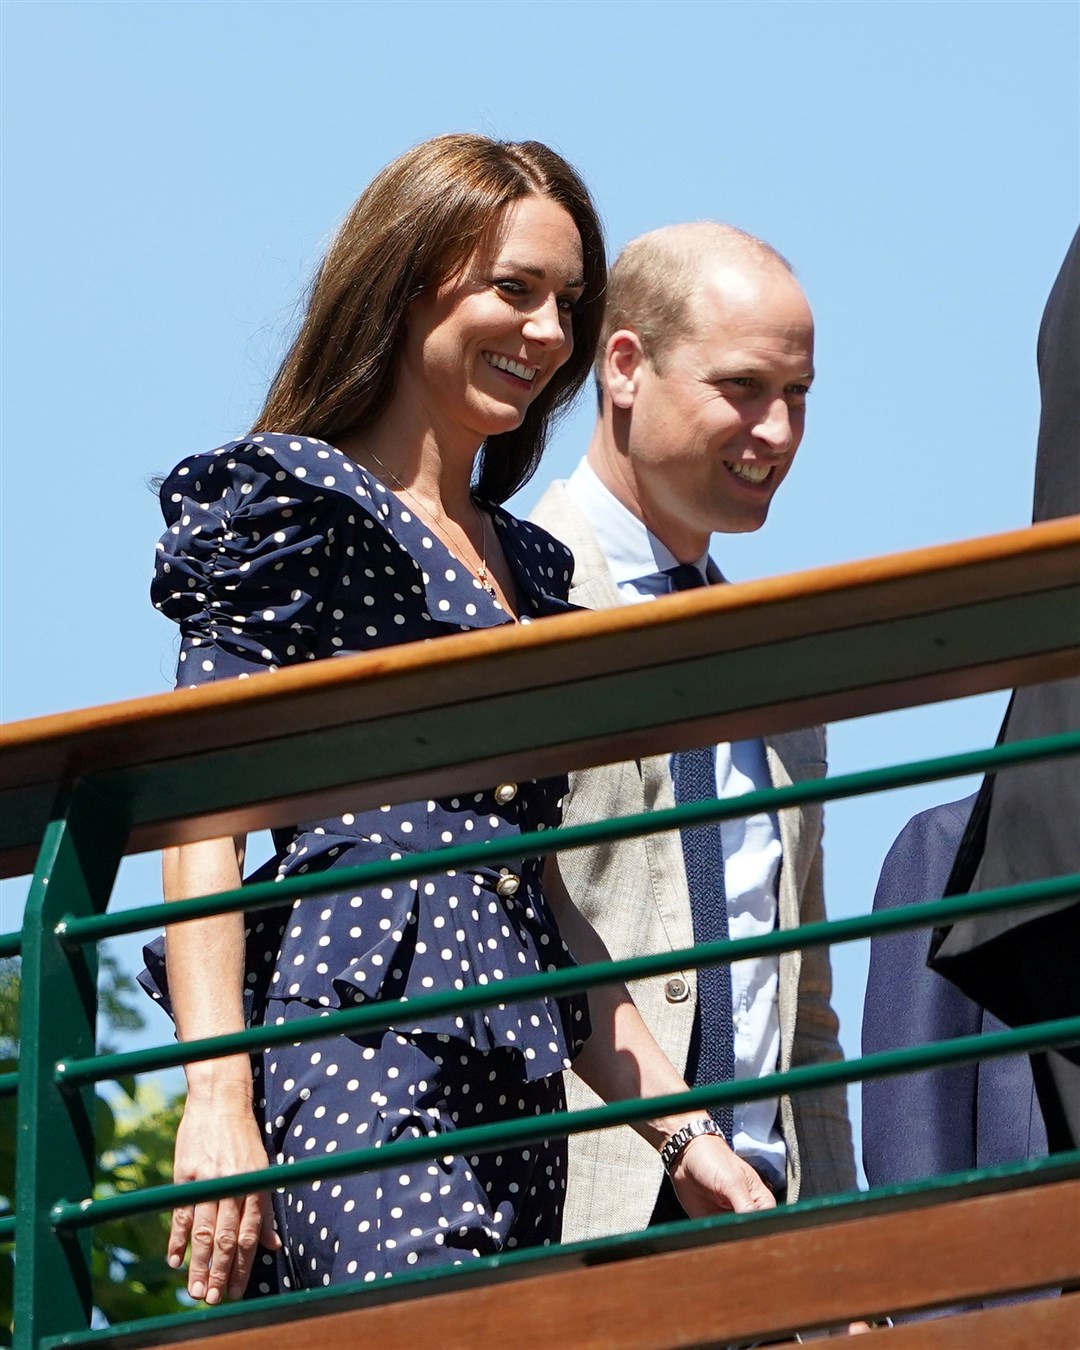 The Duke and Duchess of Cambridge, along with Prince George, arrive on day 14 of the 2022 Wimbledon Championships ahead of the men’s singles final (Zac Goodwin/PA)